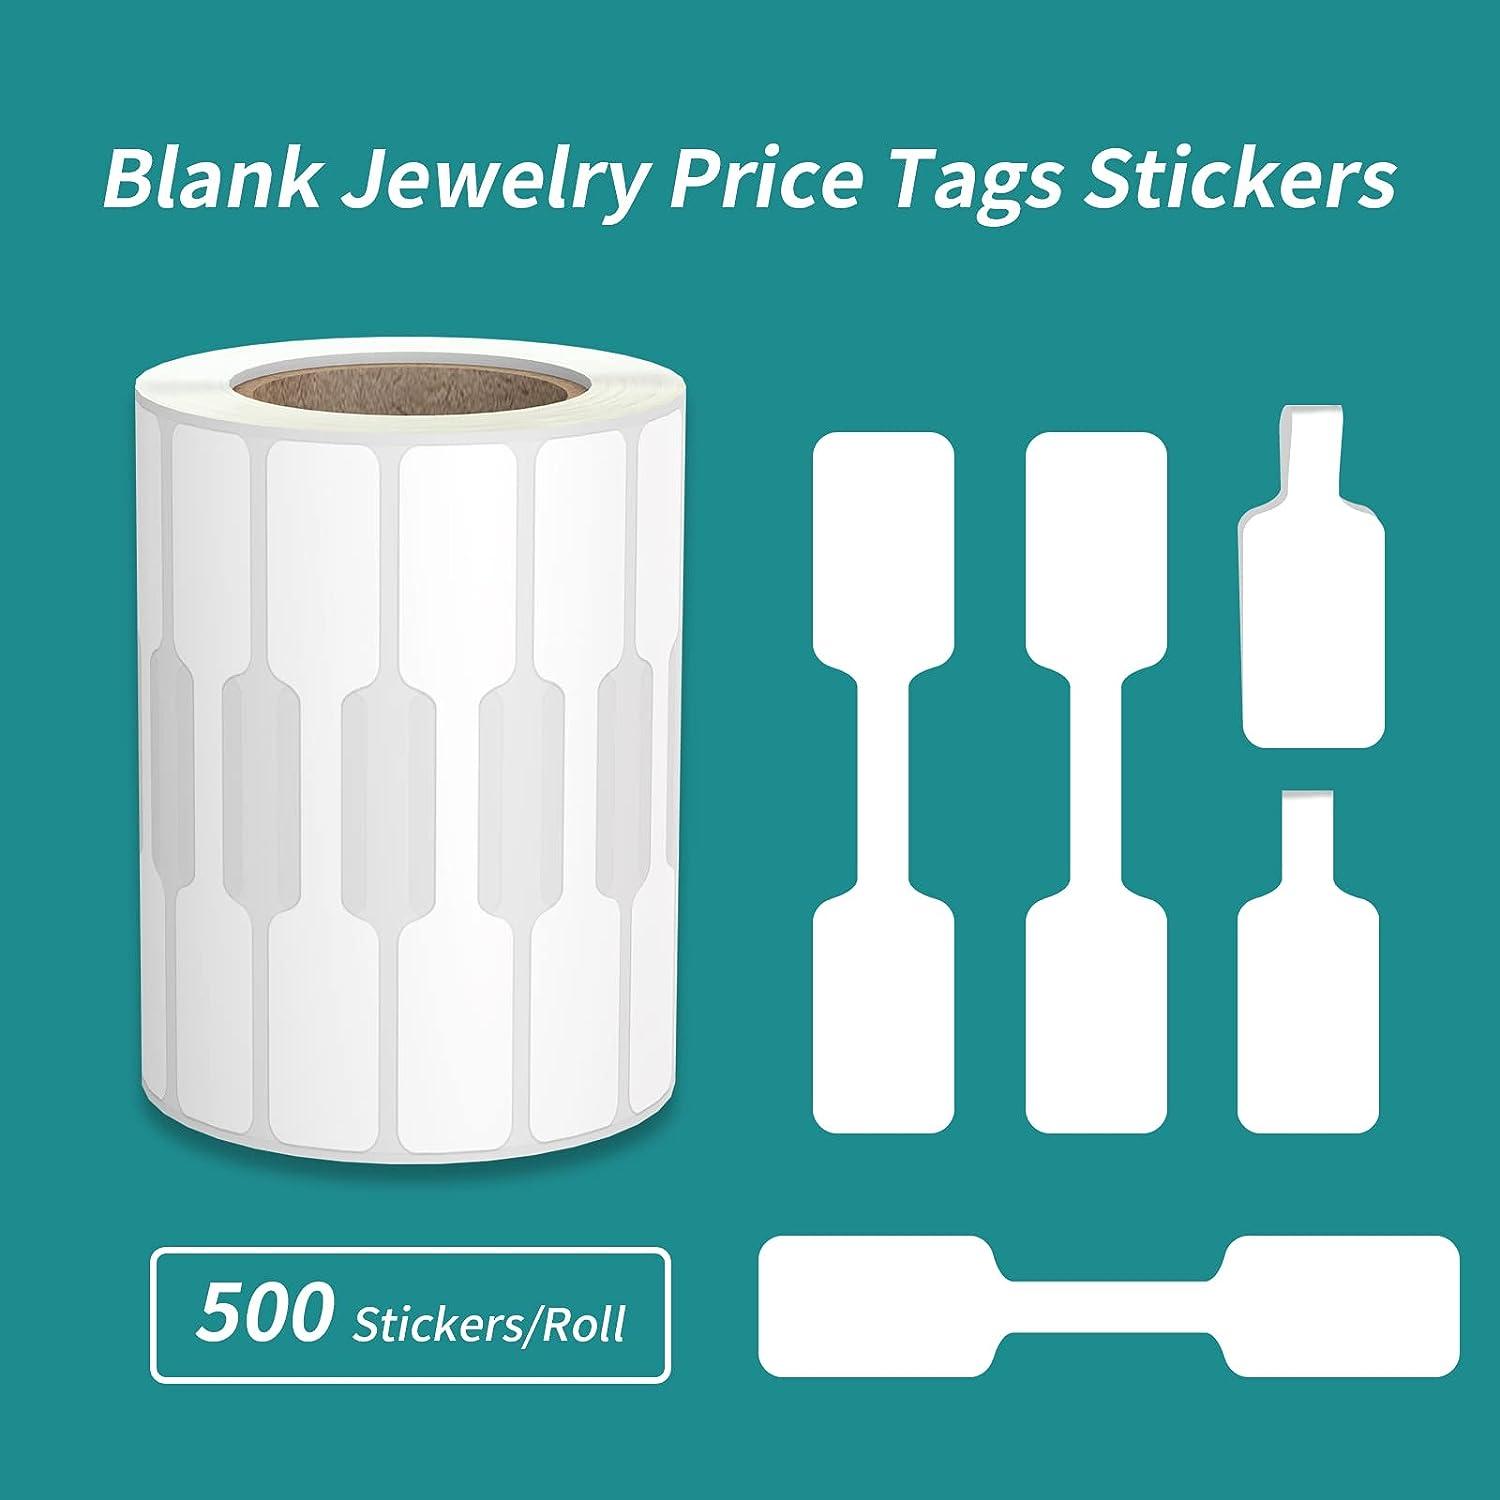 100pcs Blank Paper Price Tag Stickers For Displaying Jewelry Making Such As  Necklaces, Rings And Bracelets